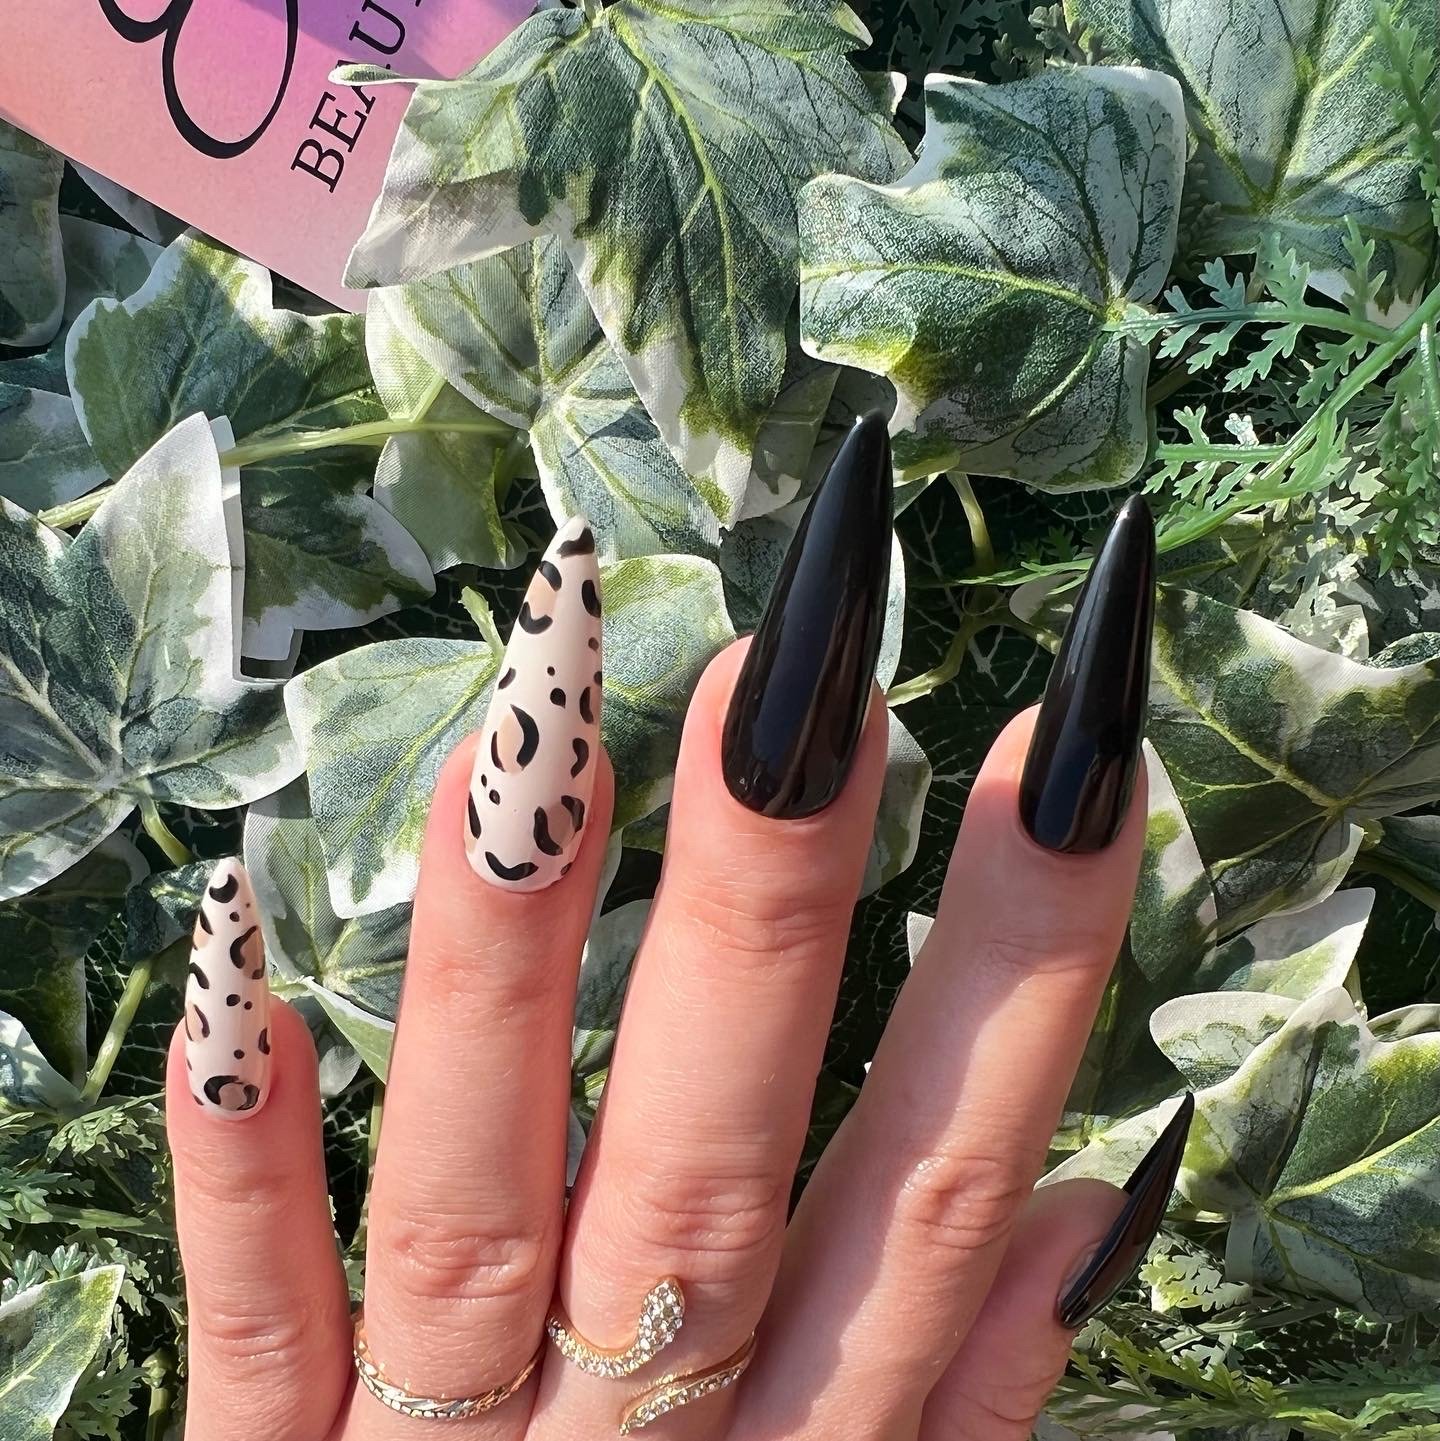 Kylie Jenner Reveals 'Leopard French' Manicure: Pics